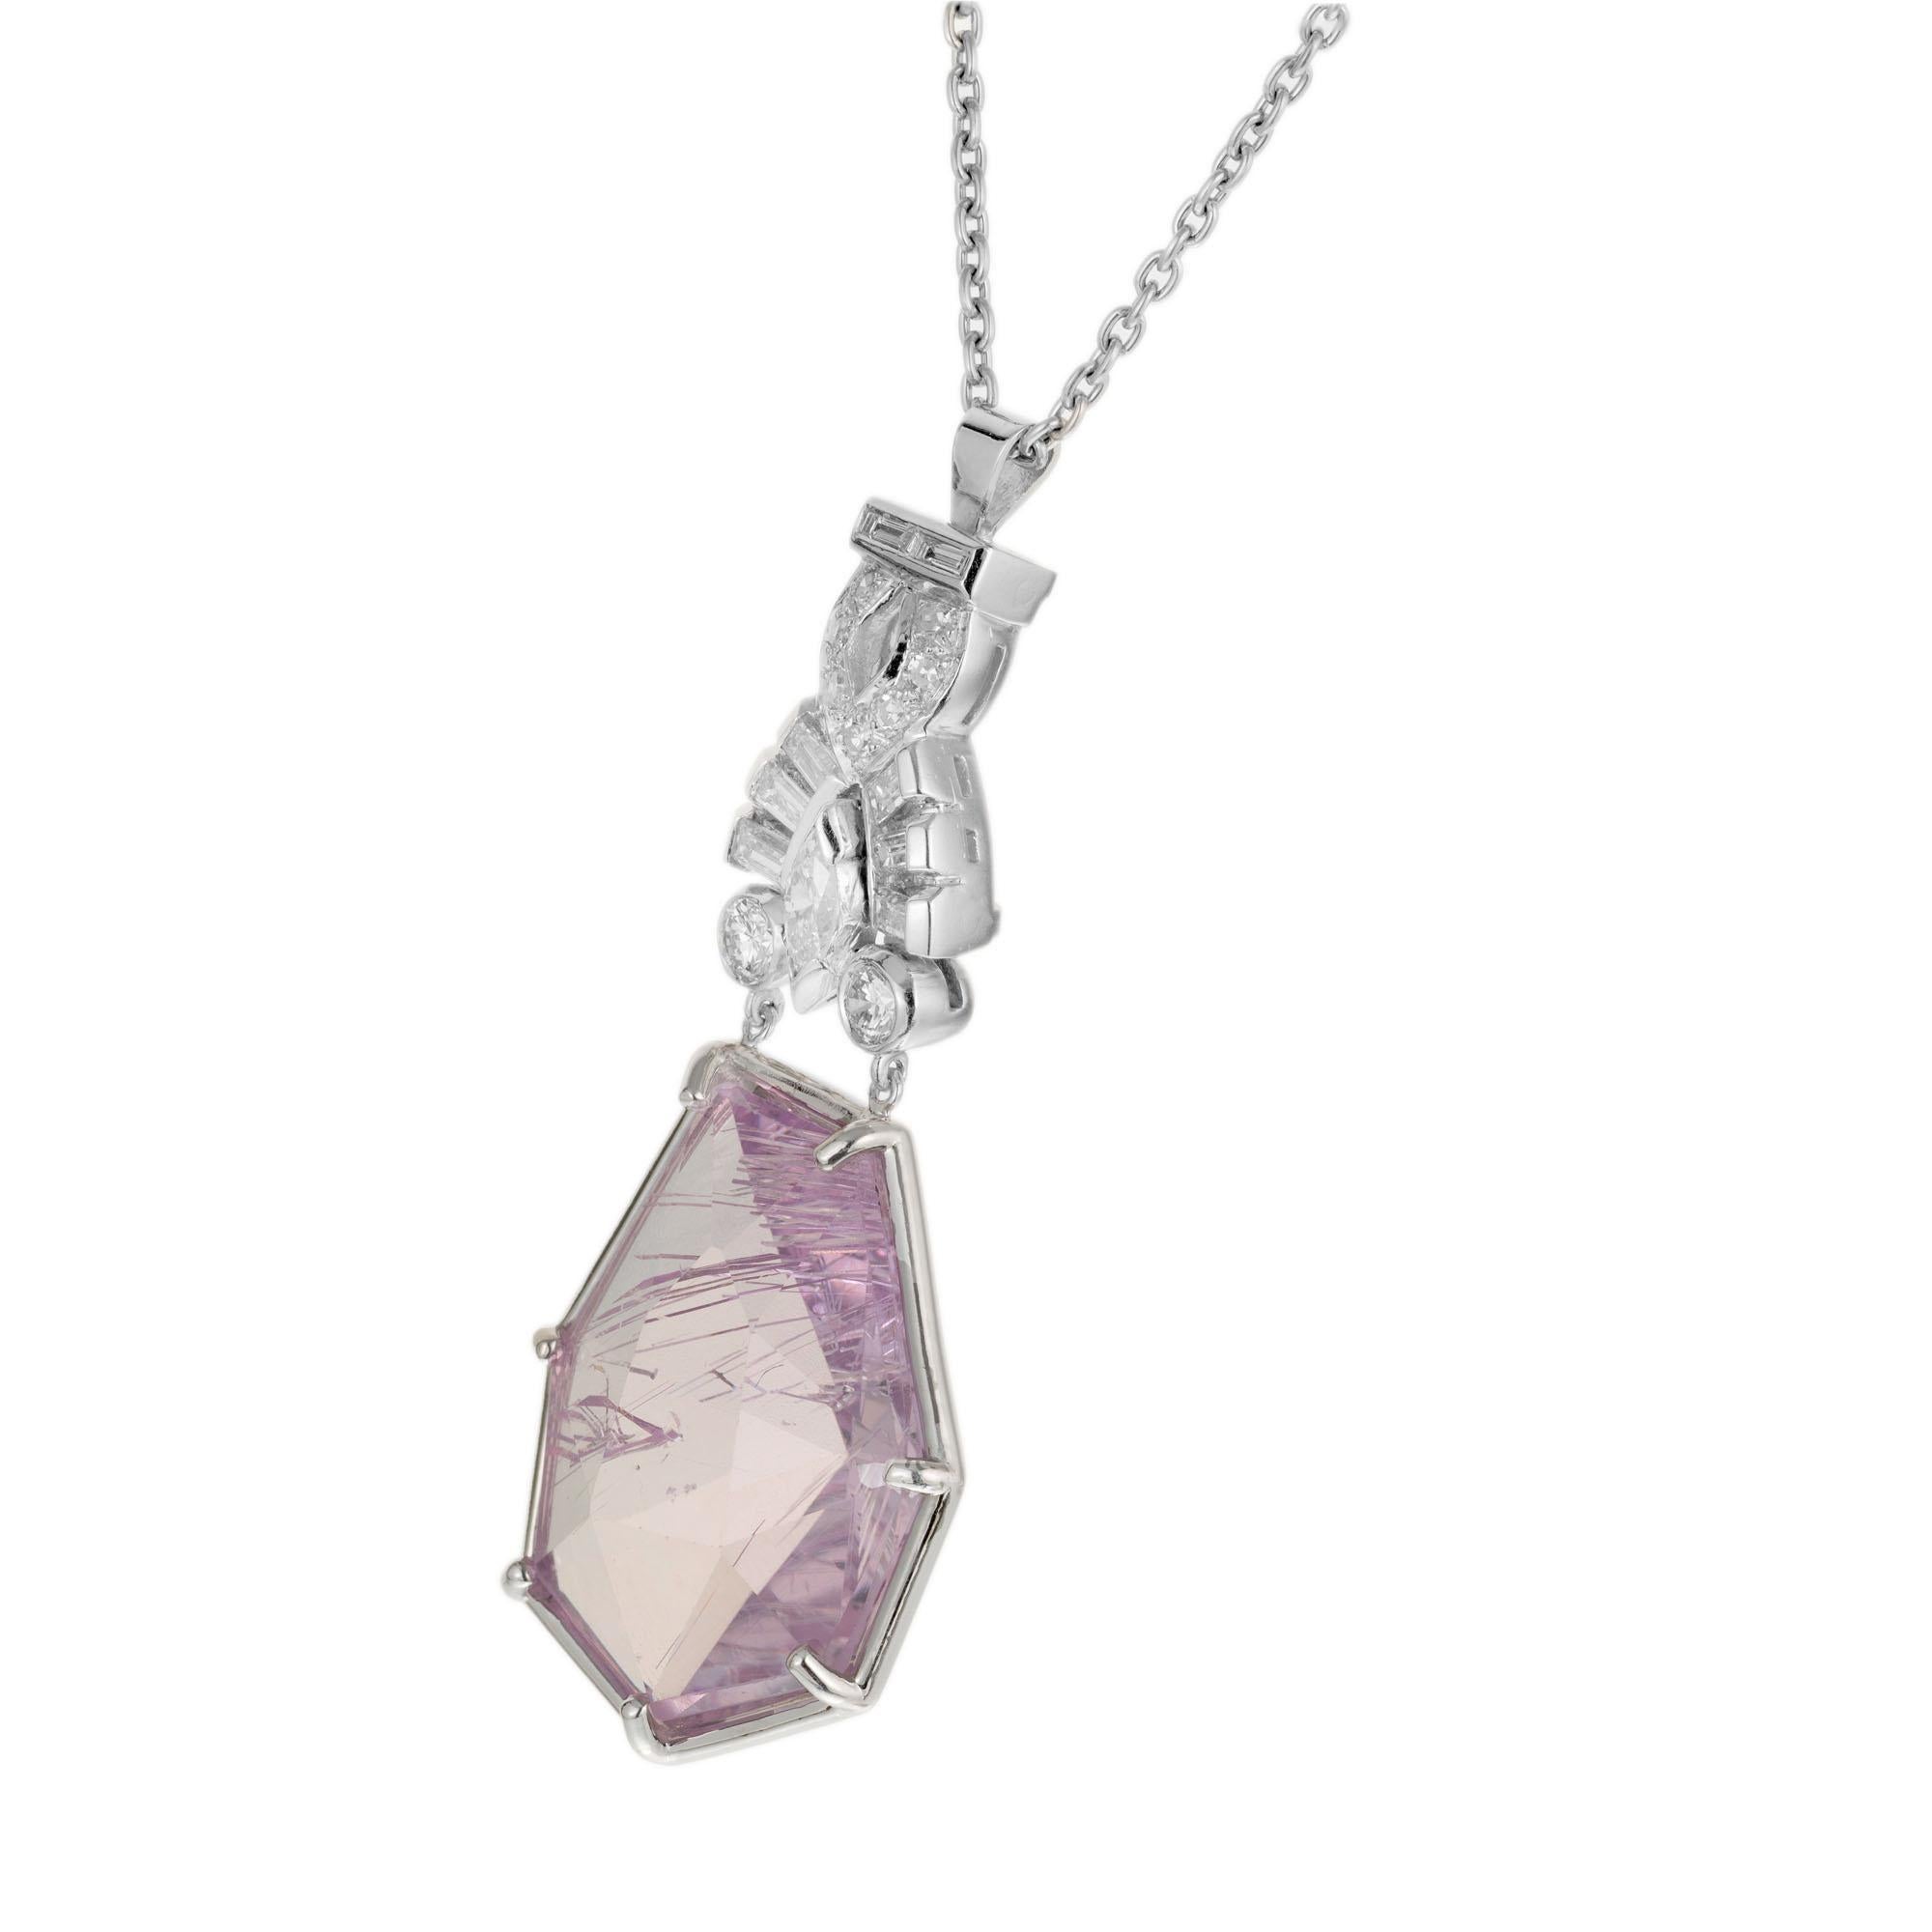 1930's Art Deco Kunzite and diamond pendant necklace. 15.00ct free form geometric natural shape rose cut Kunzite with rutile needles in a platinum setting with 8 step cut baguette,  9 round and 1 marquise cut accent diamonds. 18 inch chain. A unique